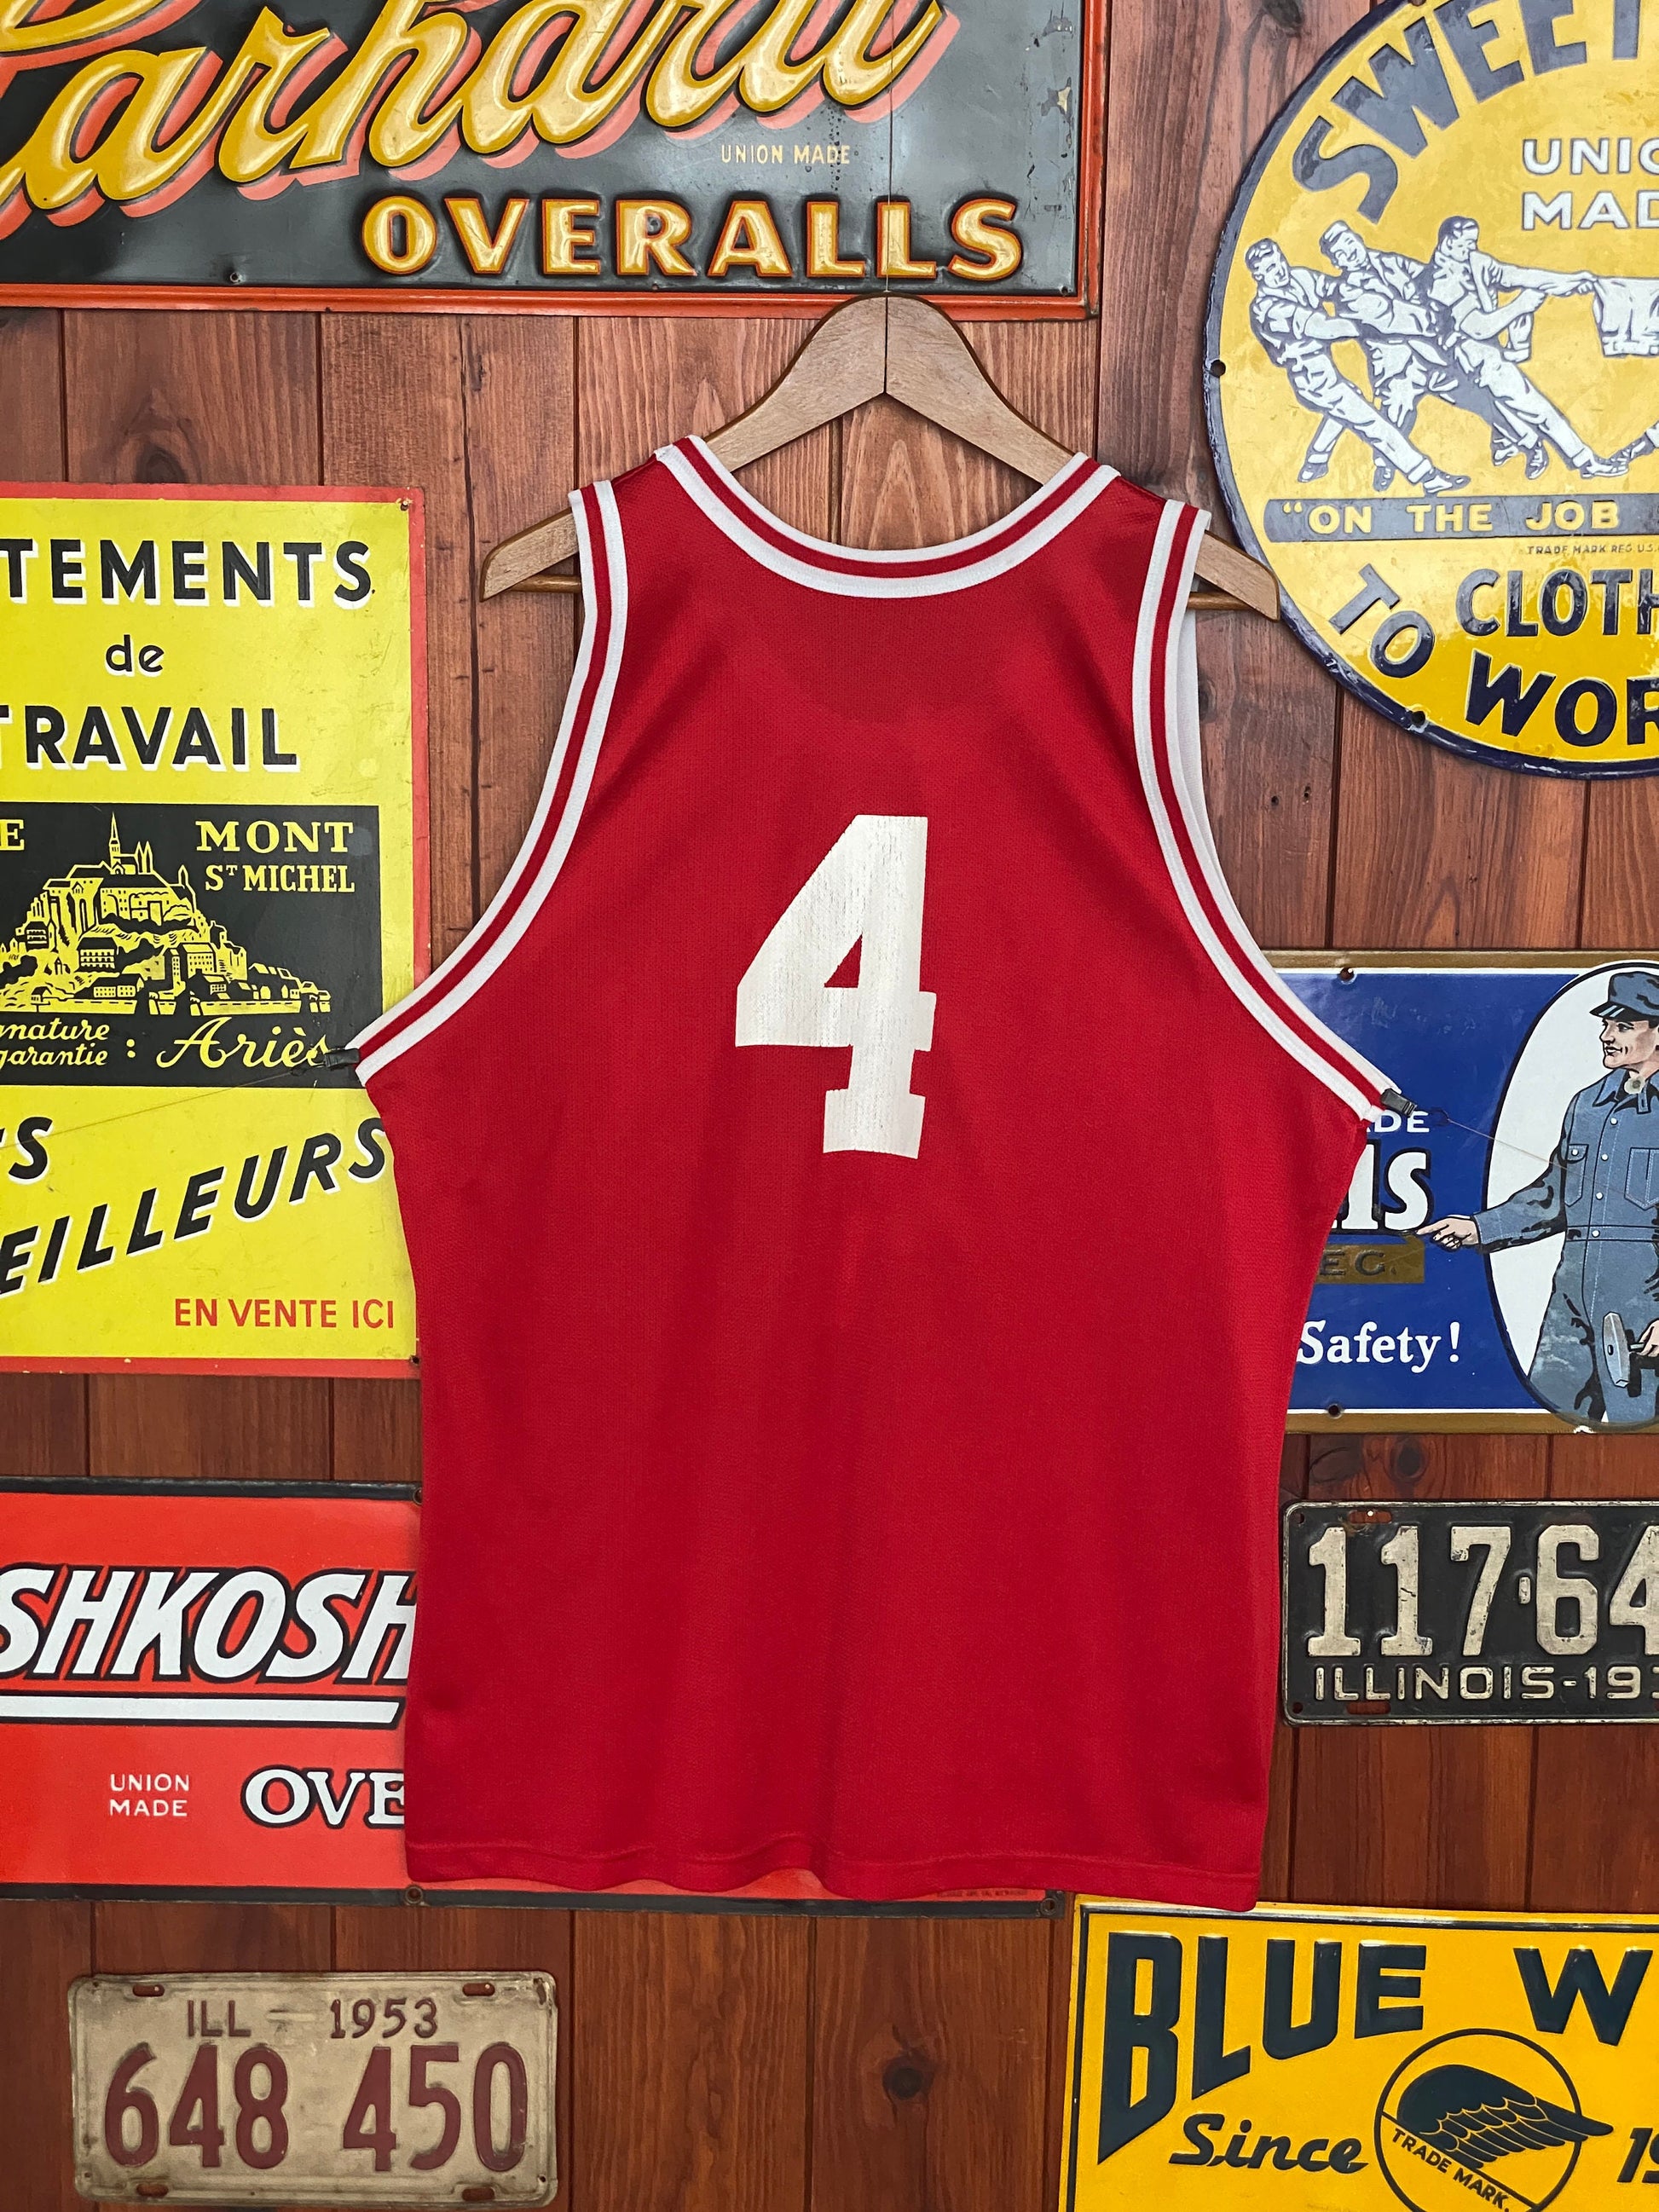 Vintage 90s Wisconsin #4 NBA Jersey - Size 48 | Made by Champion in USA